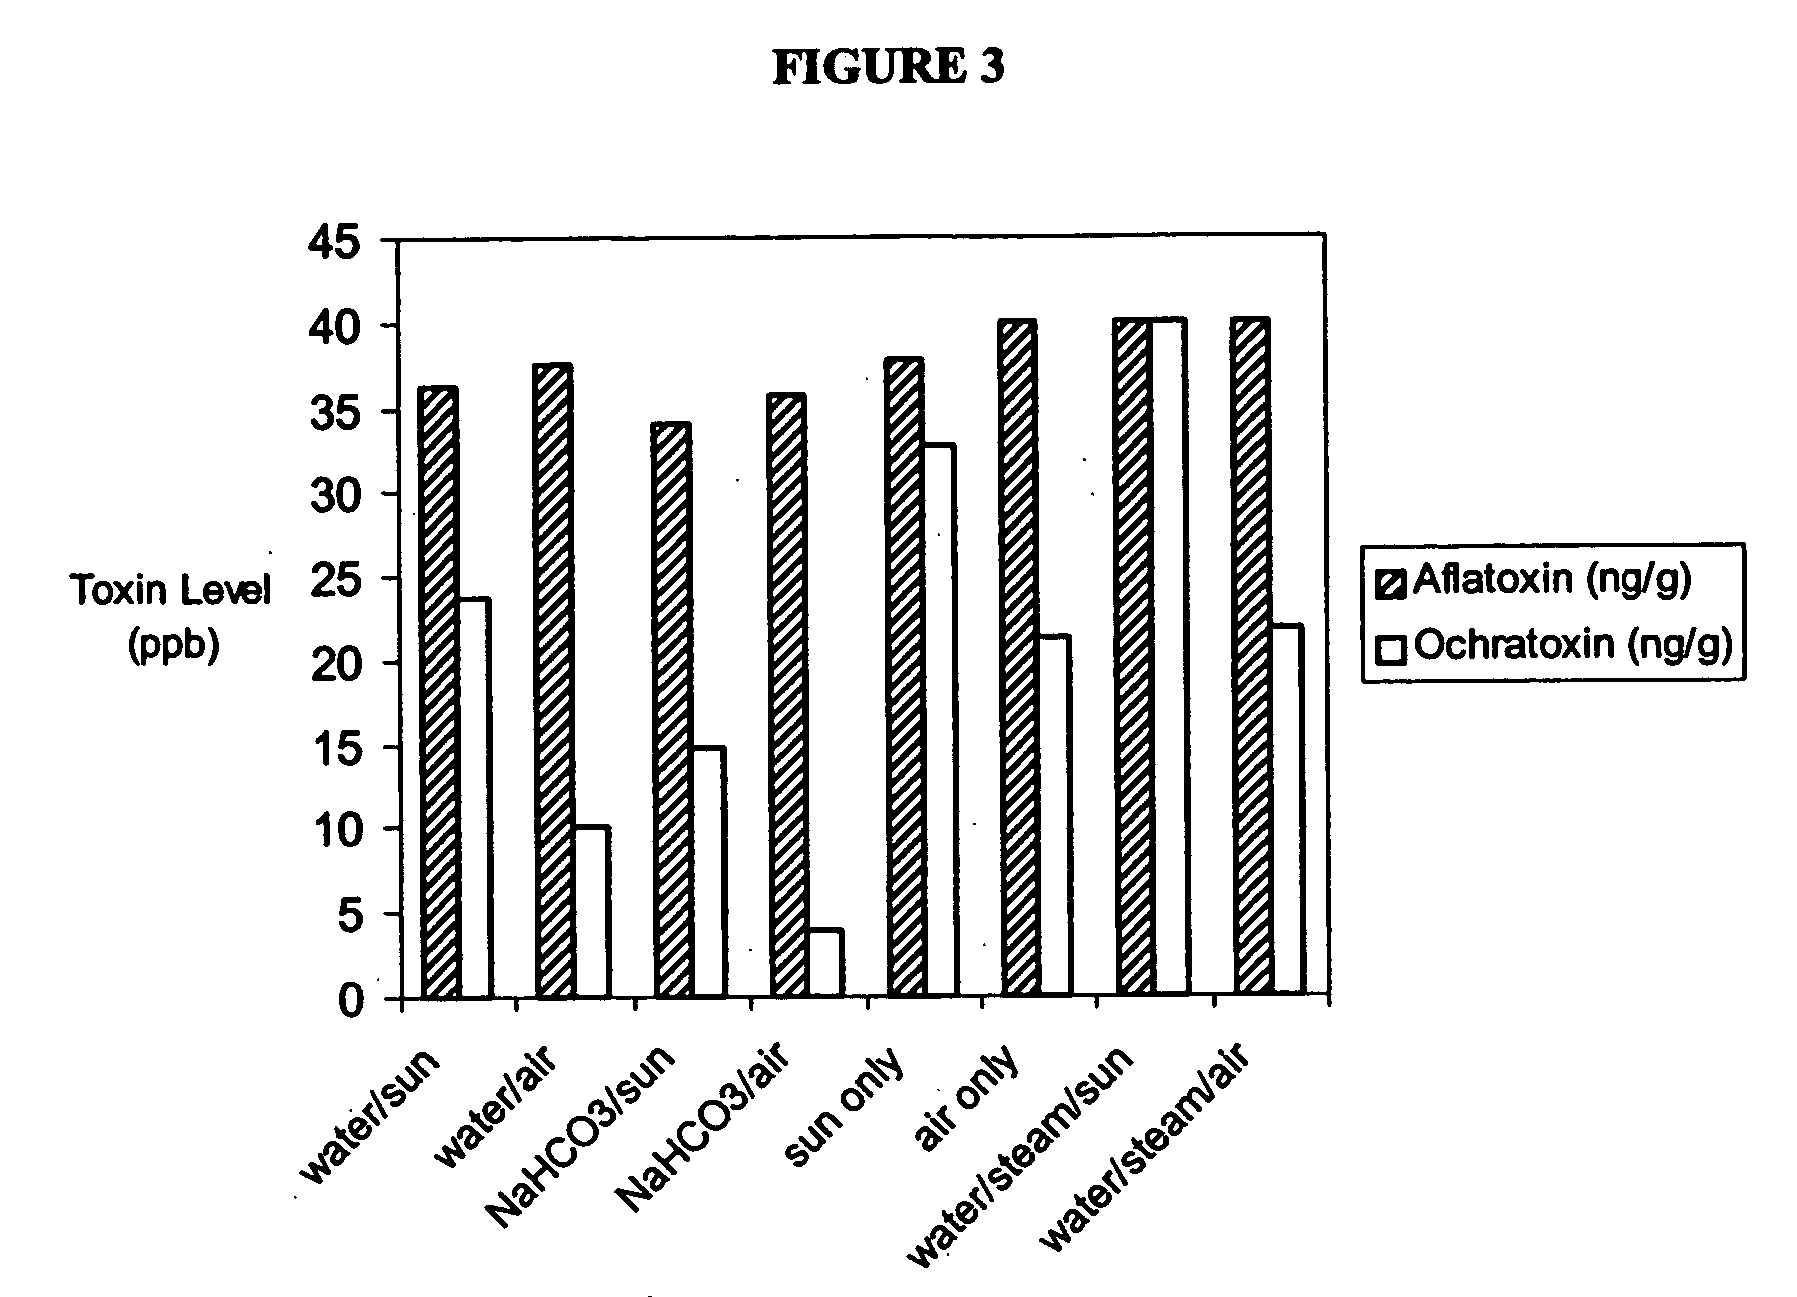 Nutraceuticals and methods of obtaining nutraceuticals from tropical crops